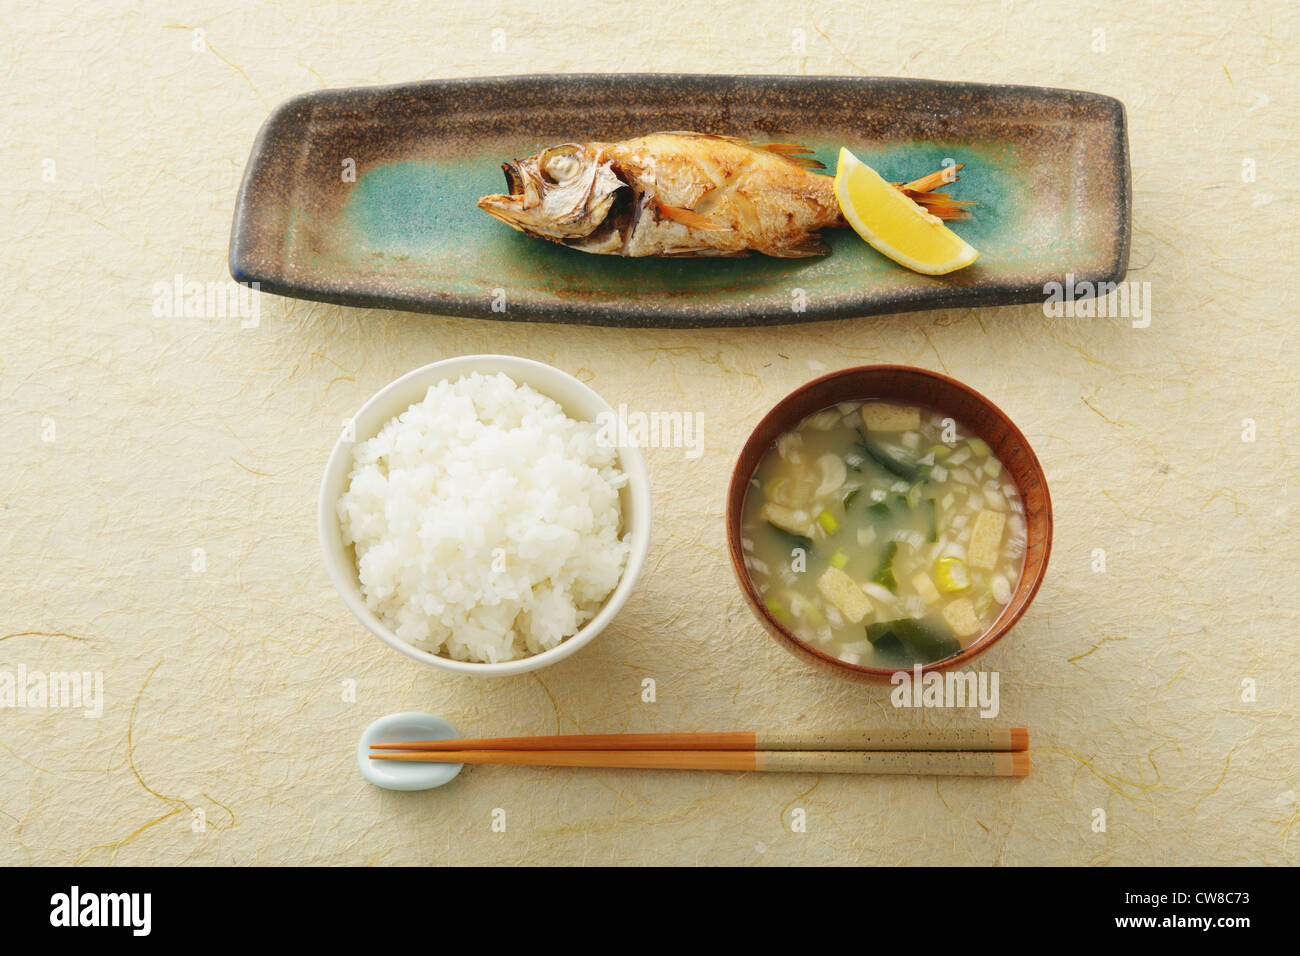 Fish On Tray With Chopstick And Boiled Rice Stock Photo